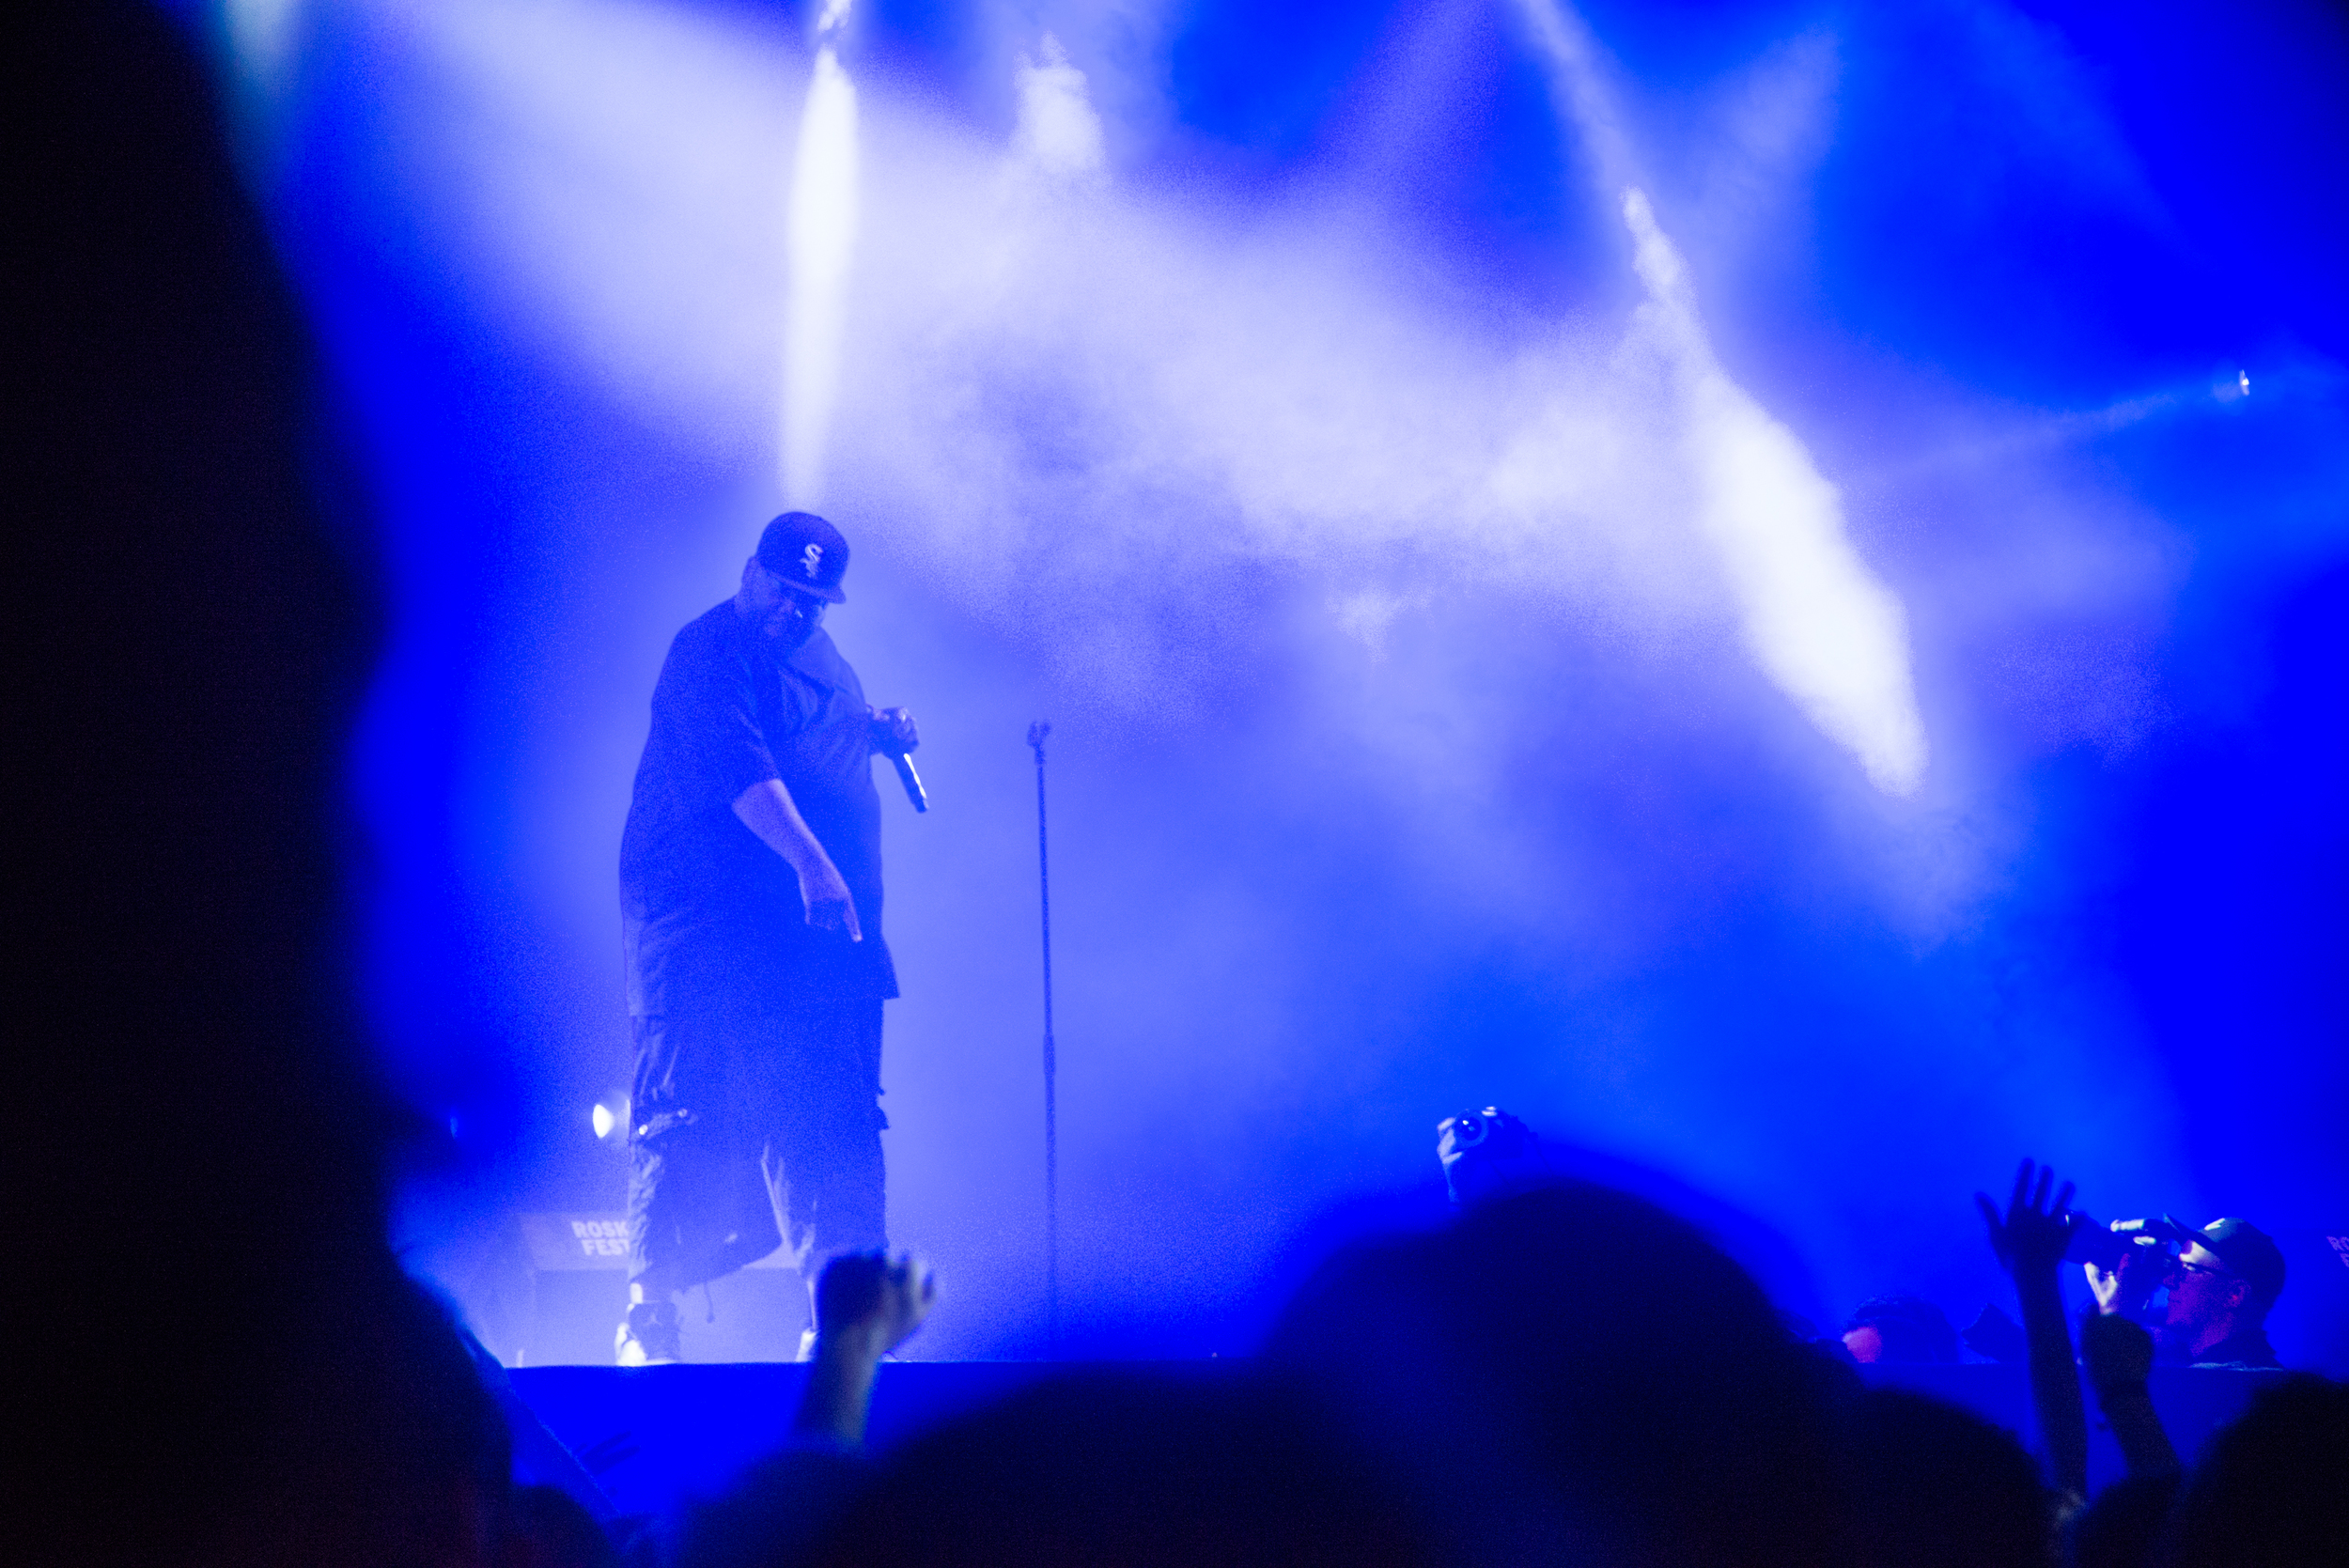 Killer Mike with Run the Jewls at Roskilde 2015